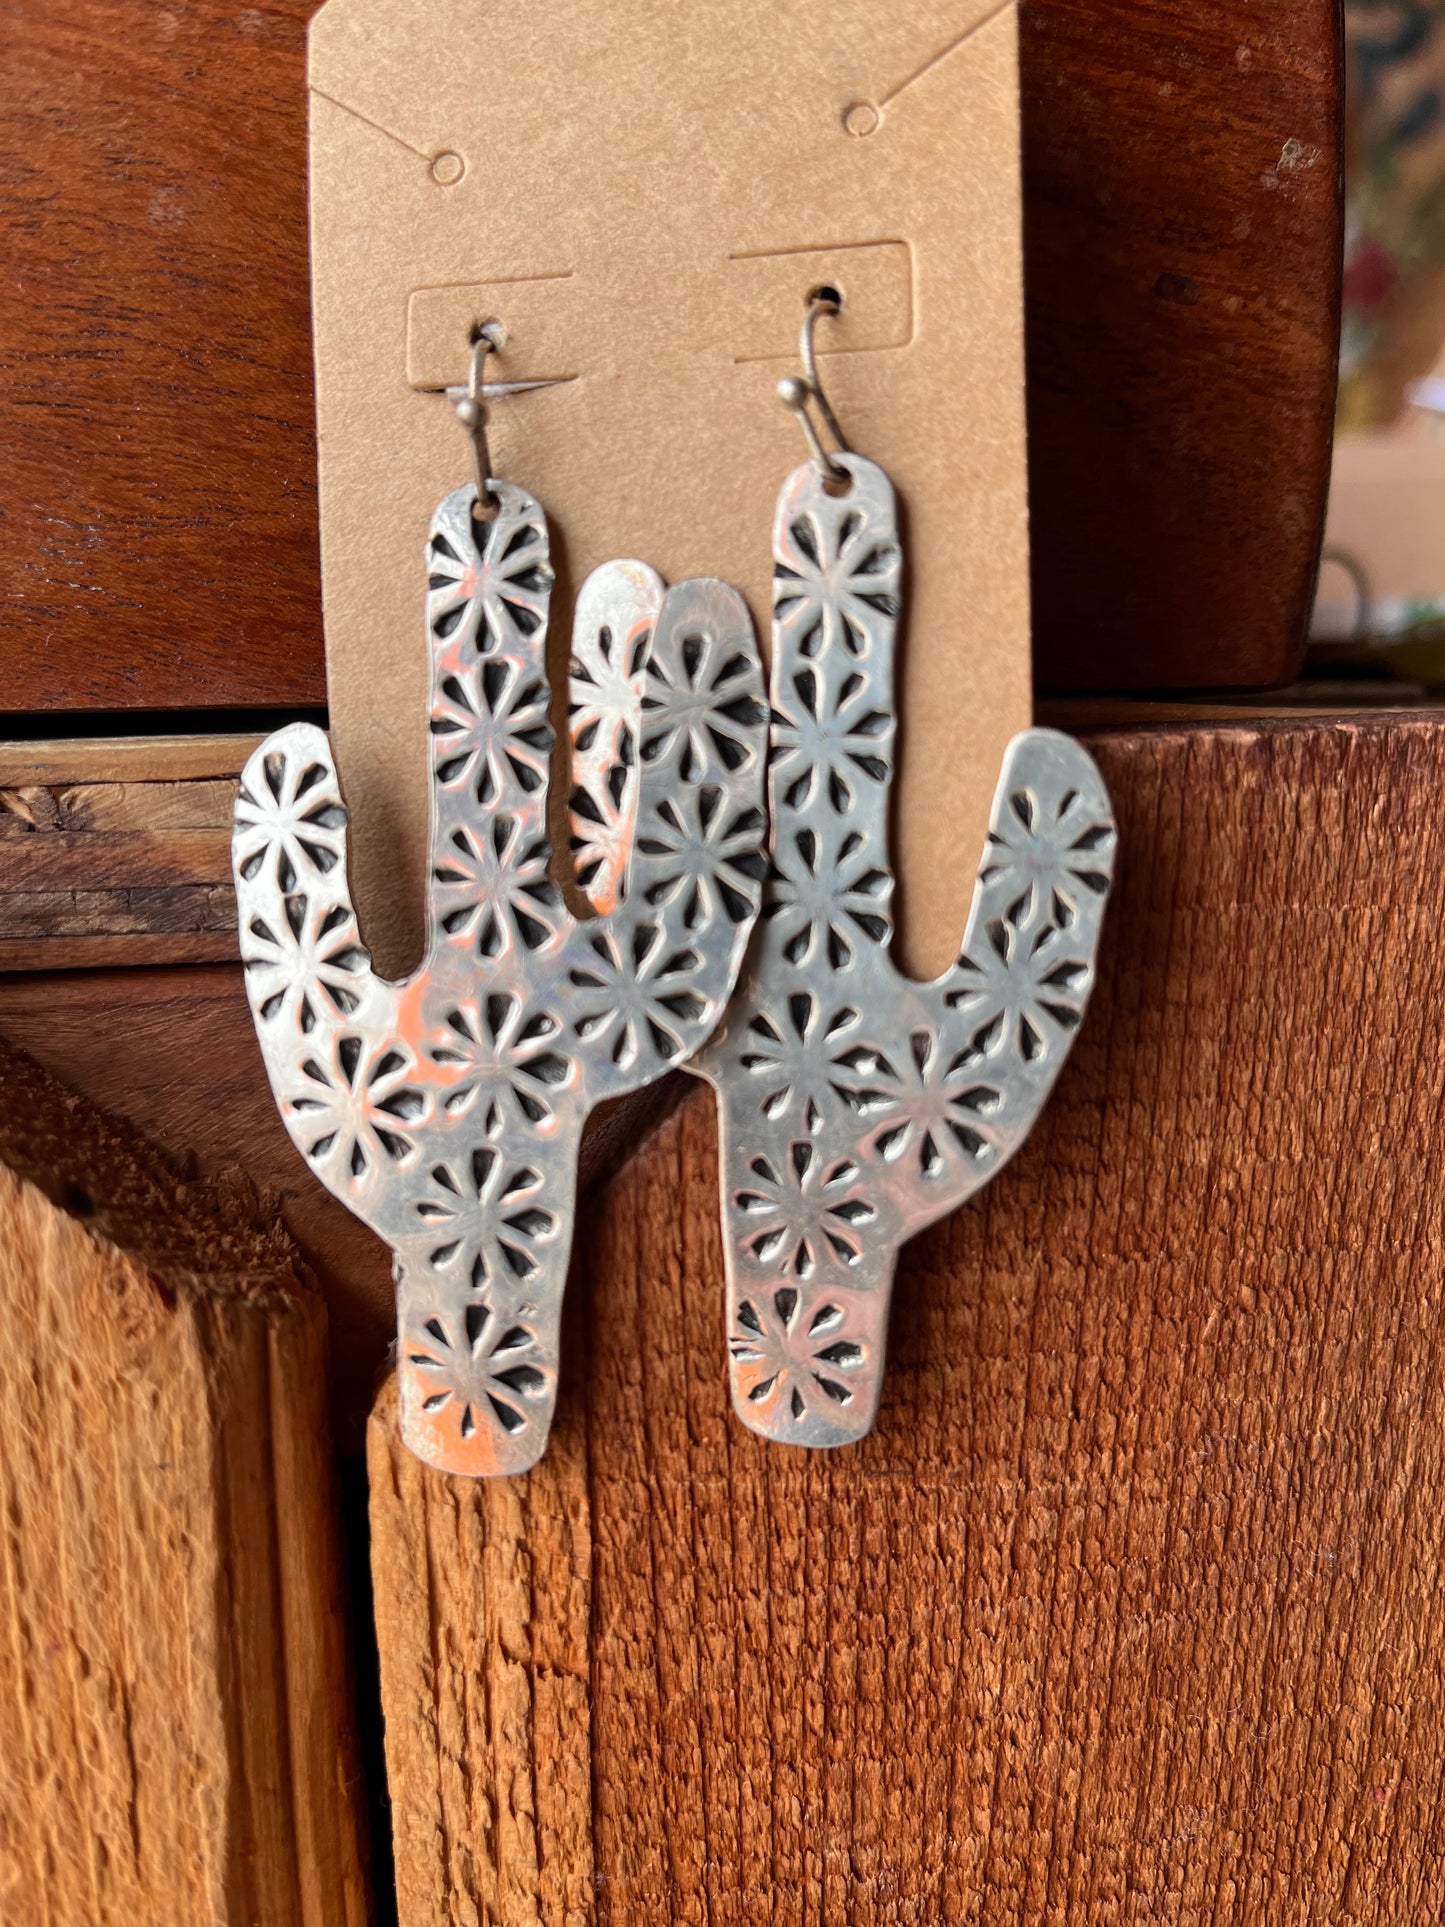 Silver cactus earrings with starburst